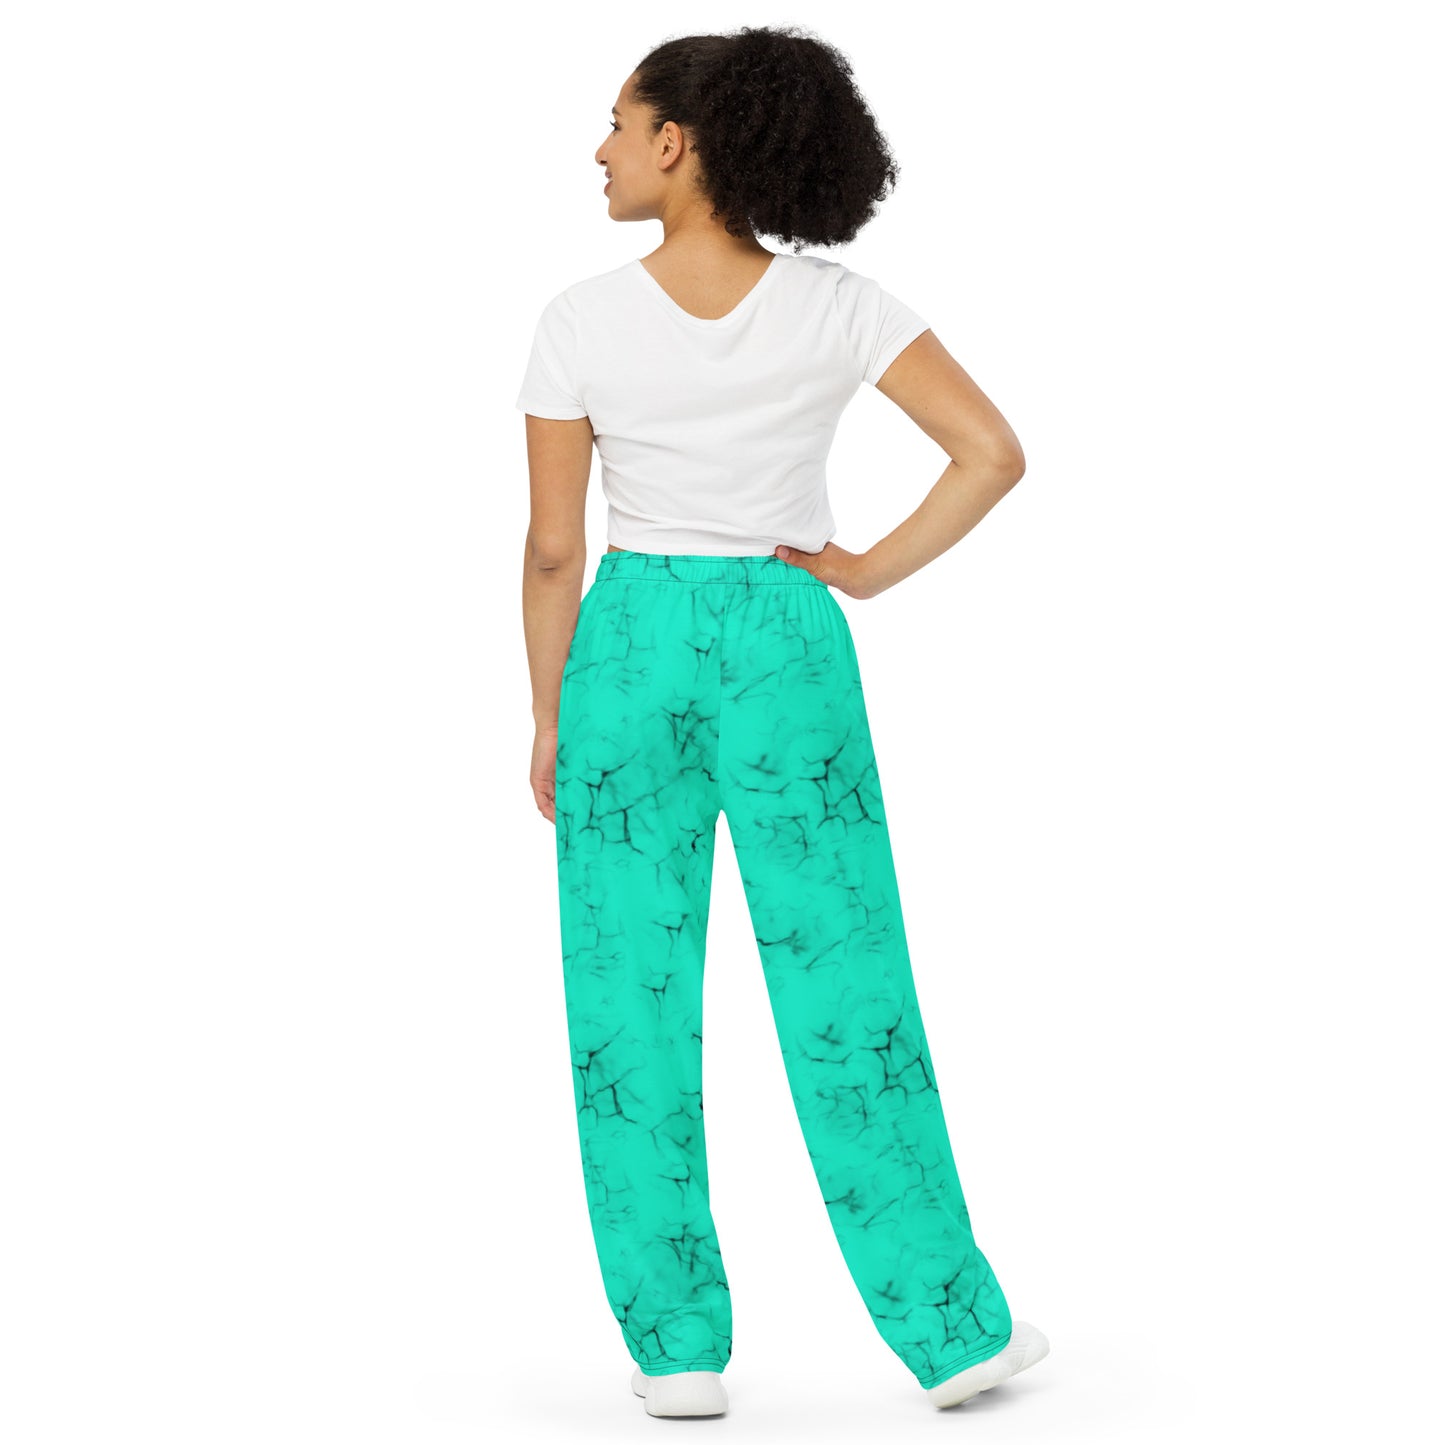 Turquoise Cactus - All-over print unisex wide-leg pants